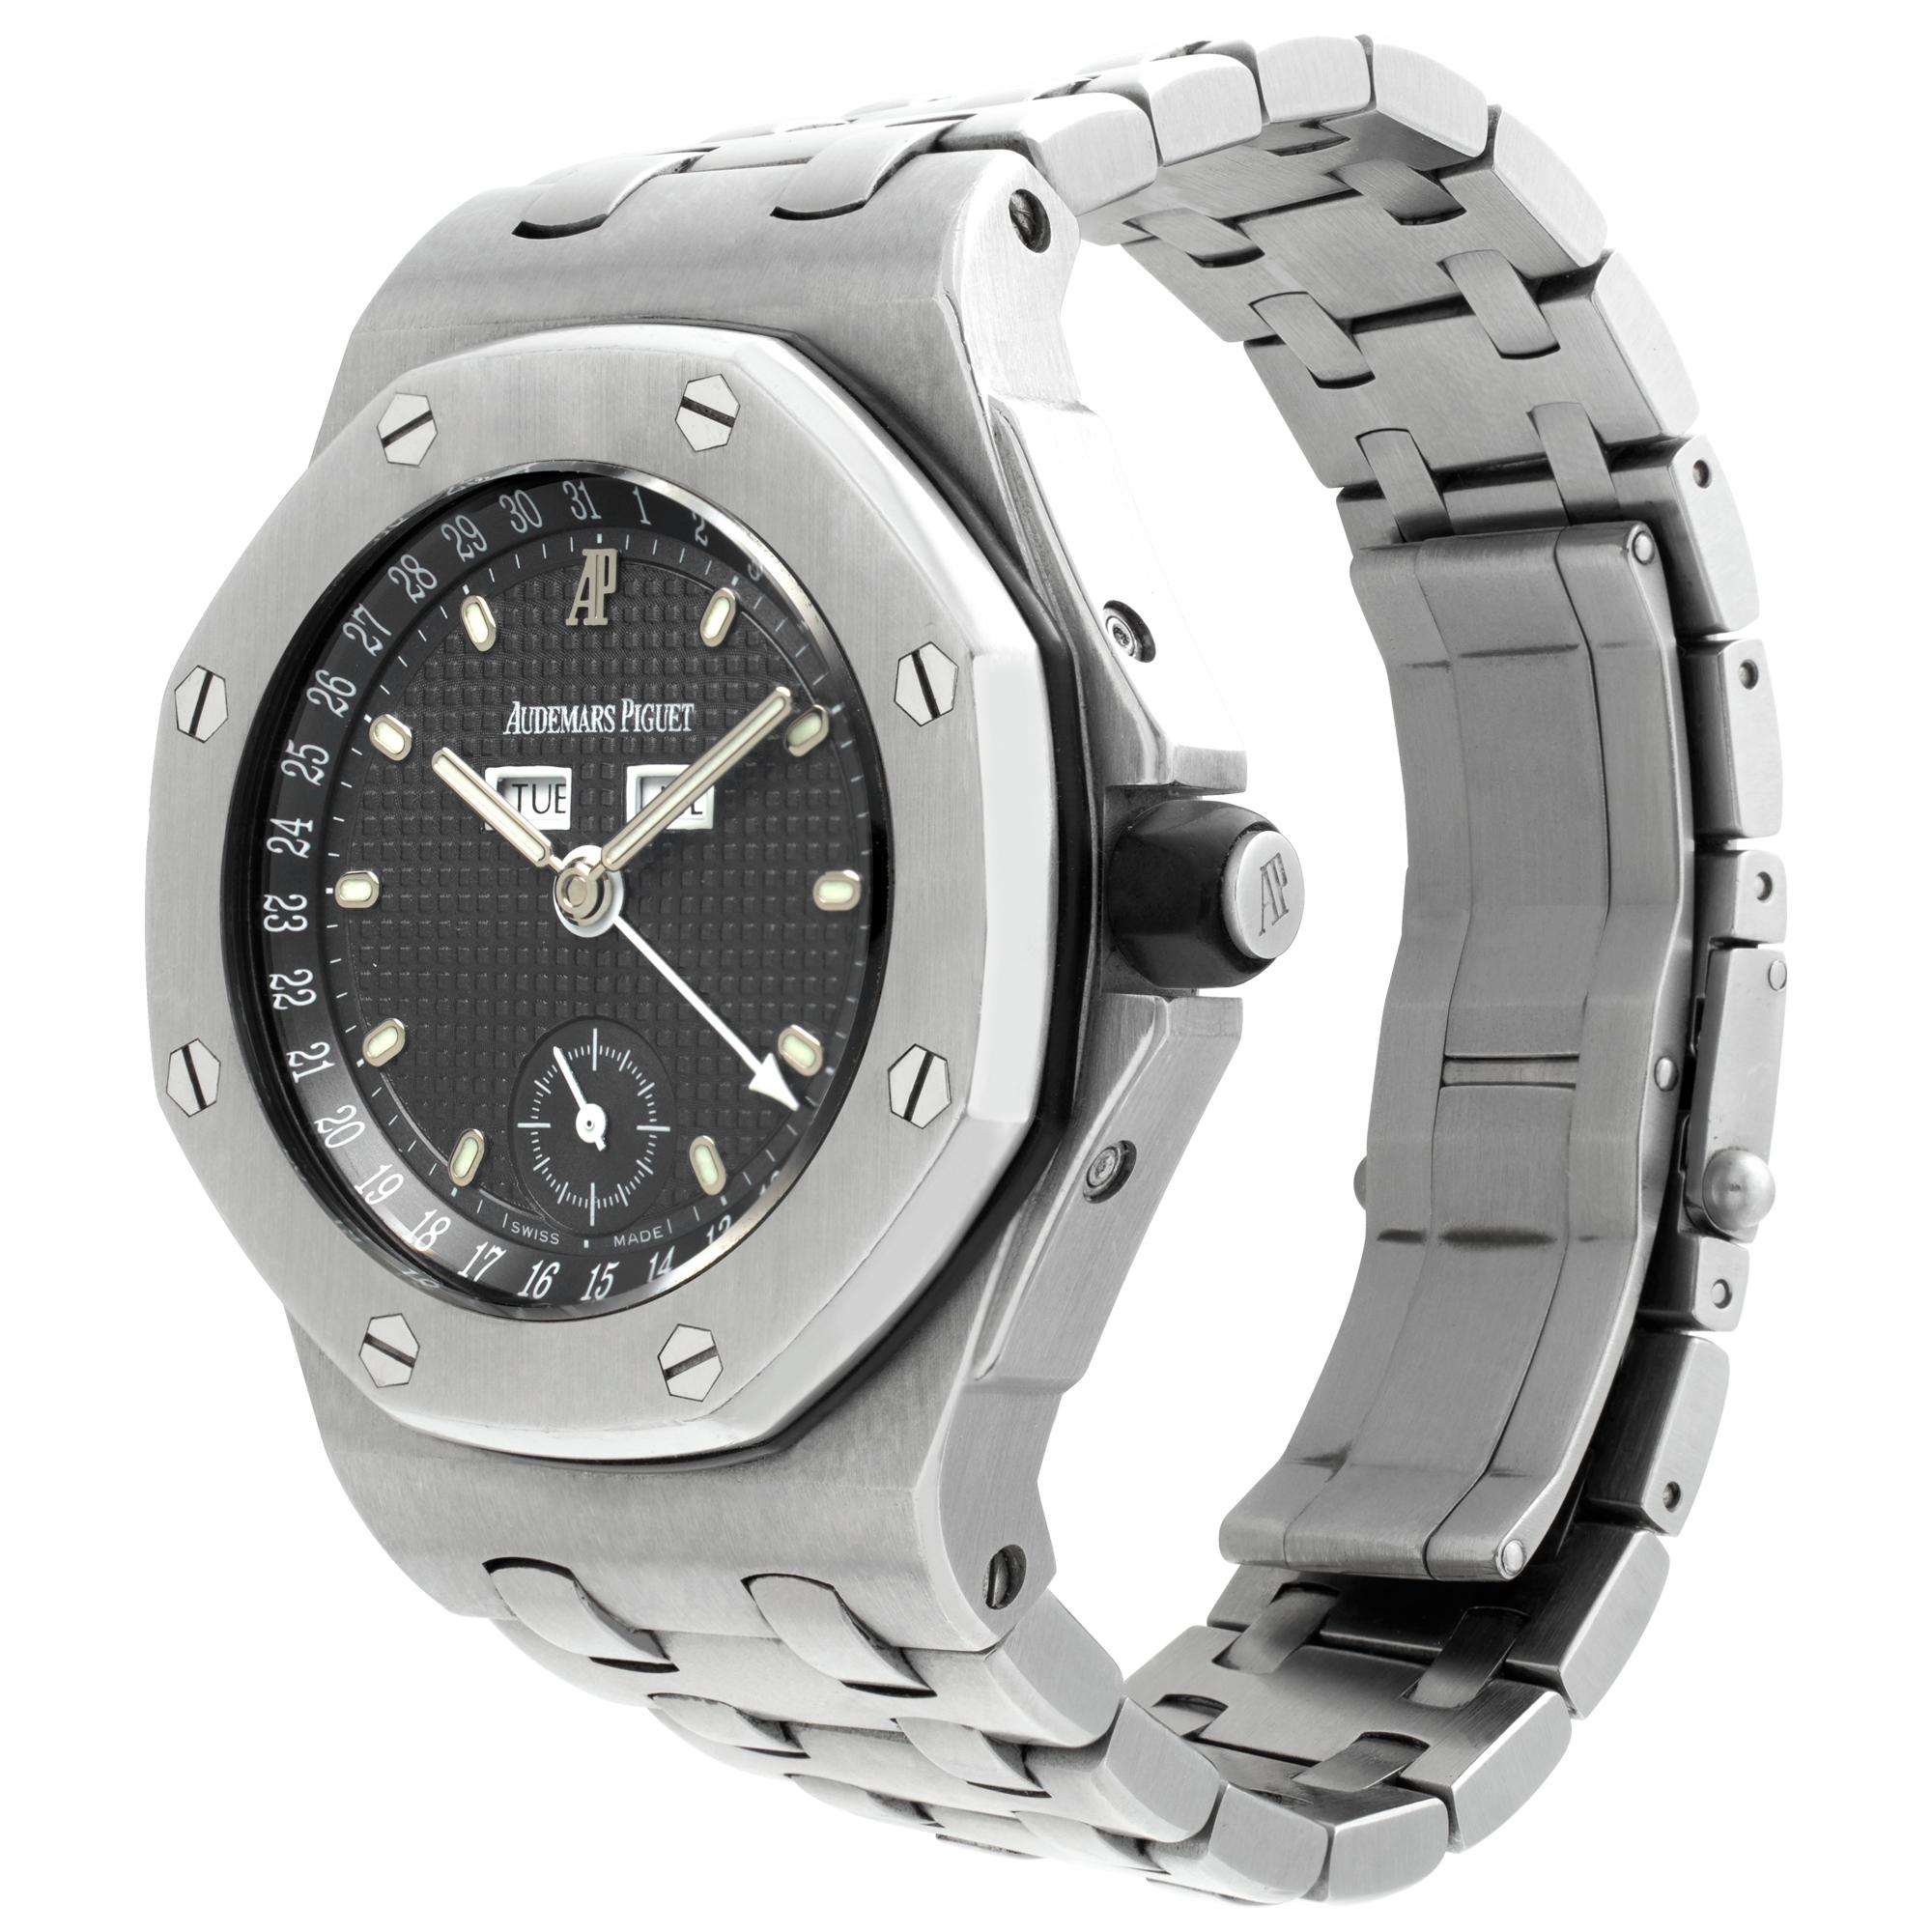 Audemars Piguet Royal Oak Offshore Triple Calendar in stainless steel with charcoal grey dial. Auto w/ subseconds, date, day and month. 38 mm case size. Ref 25808ST.OOD009XX.01. Circa late 1990's **Bank wire only at this price** Fine Pre-owned